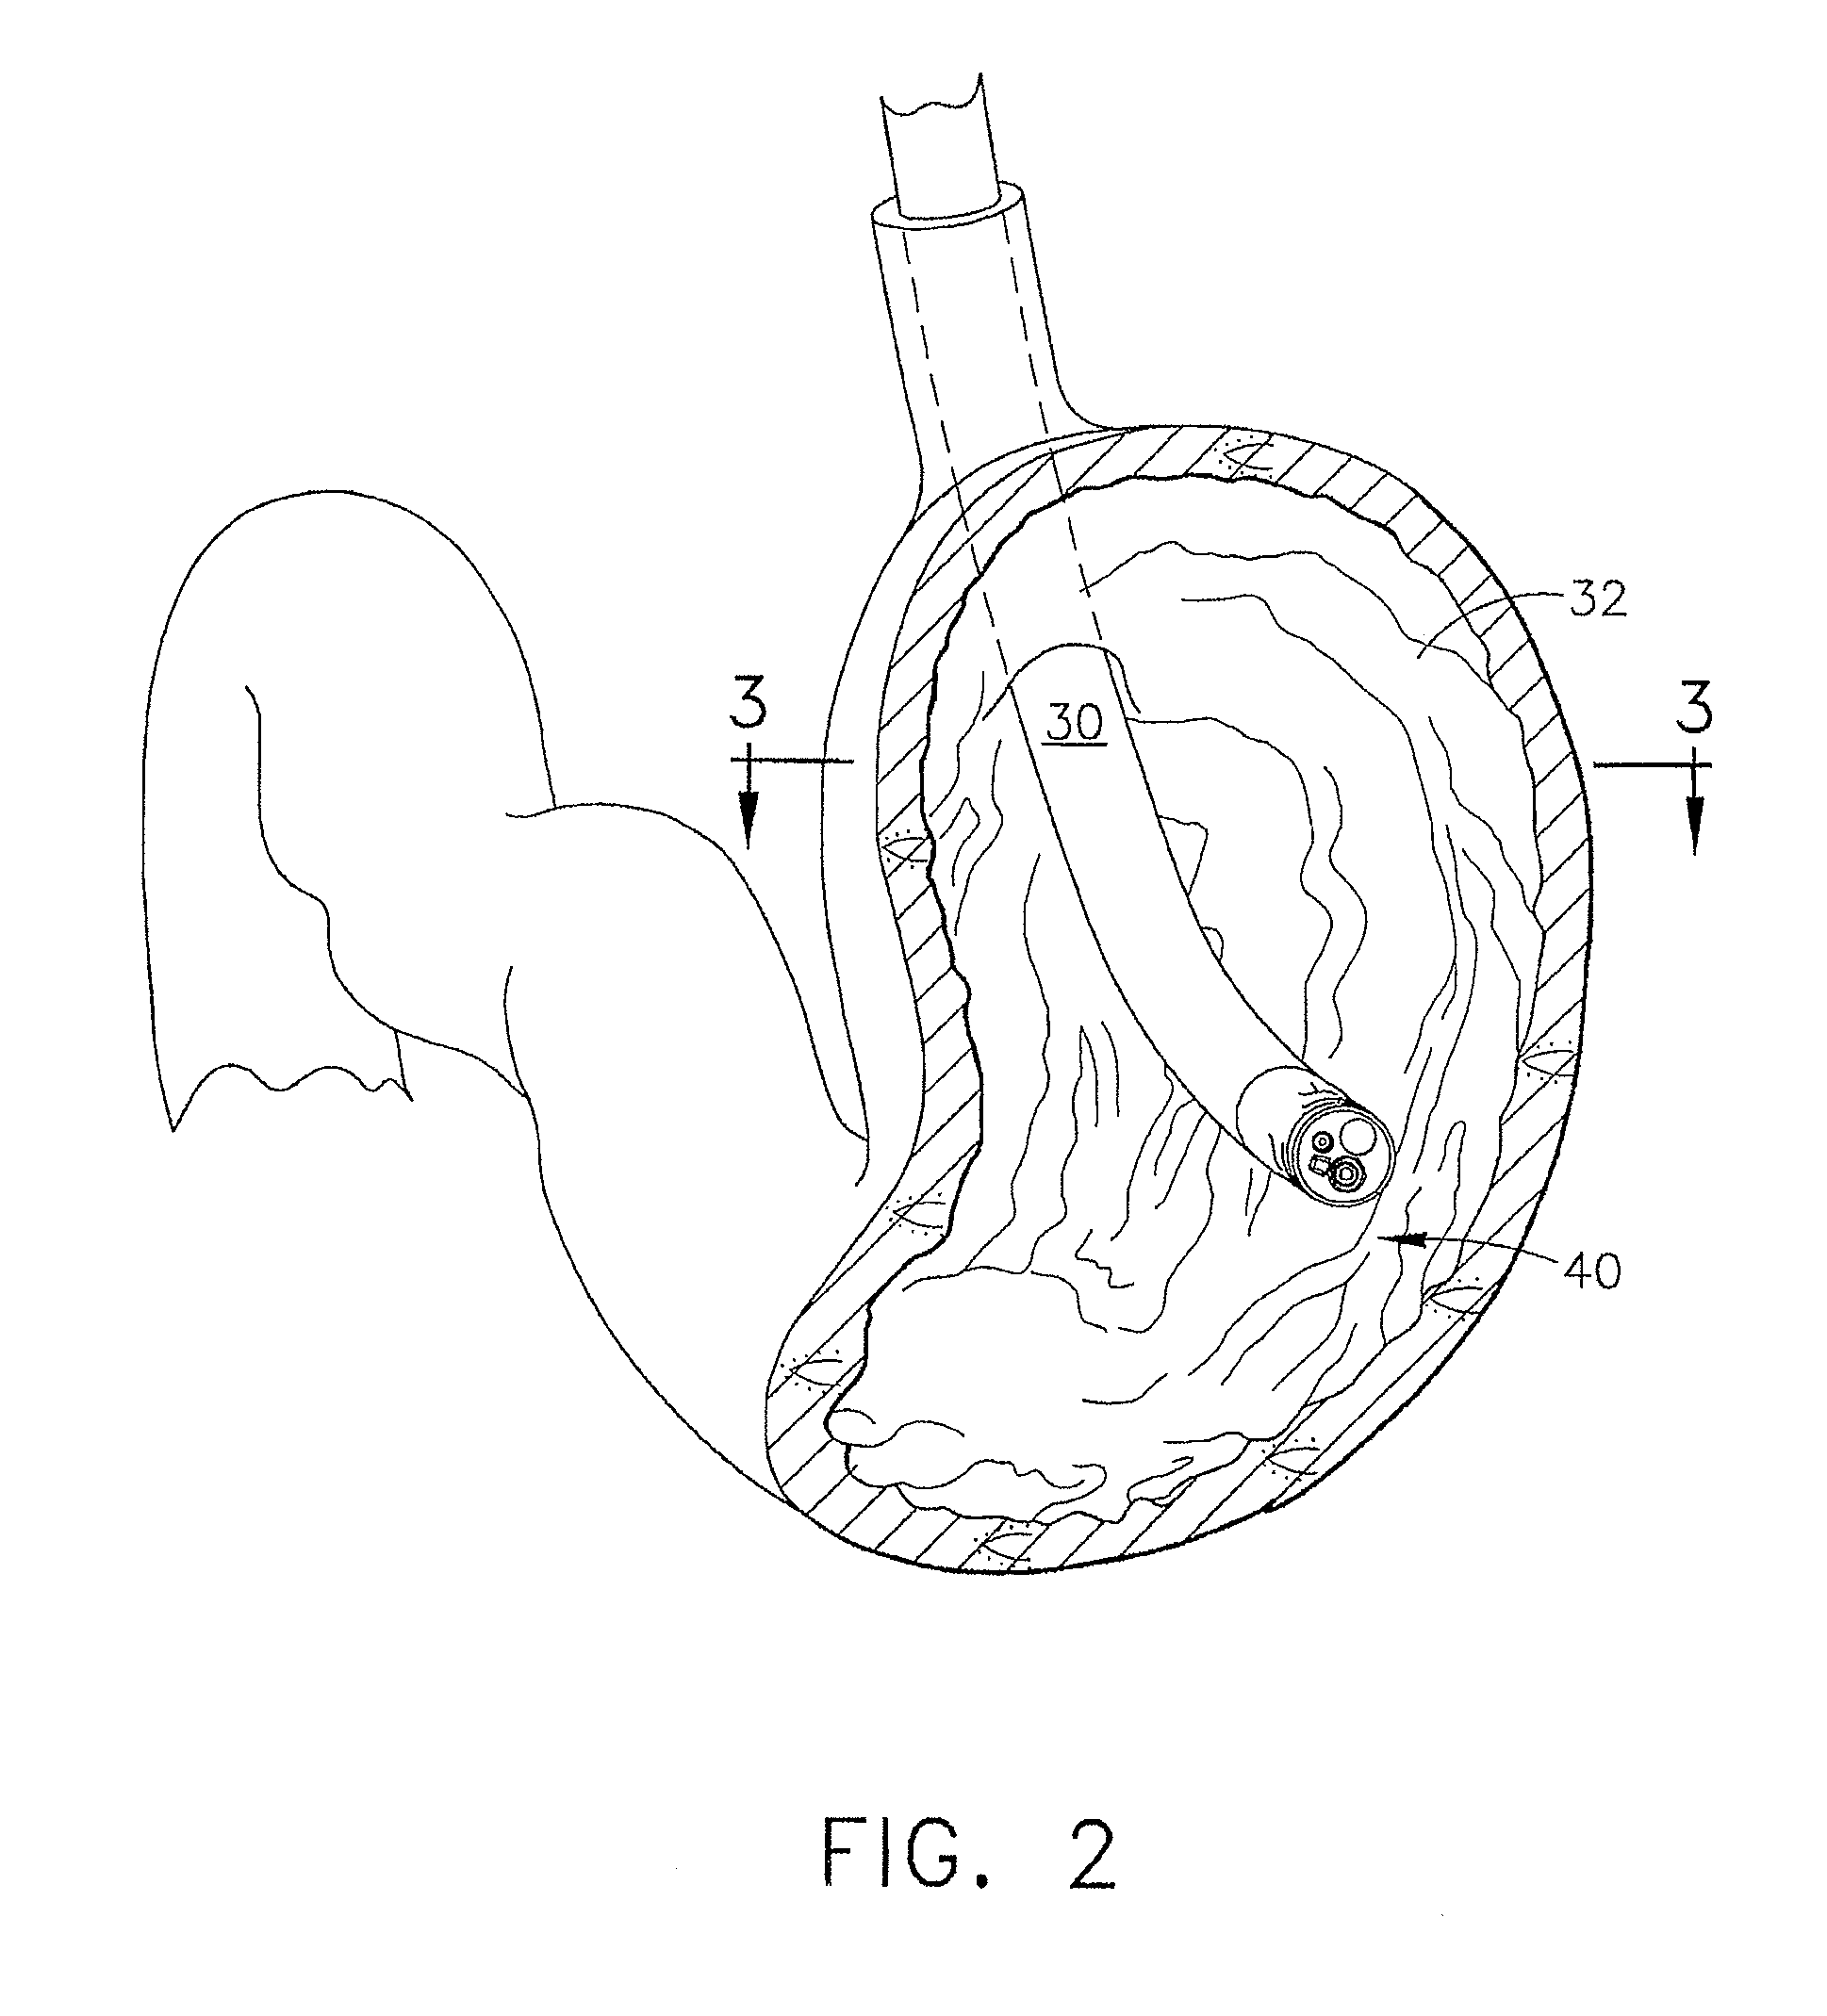 Device for insufflating the interior of a gastric cavity of a patient